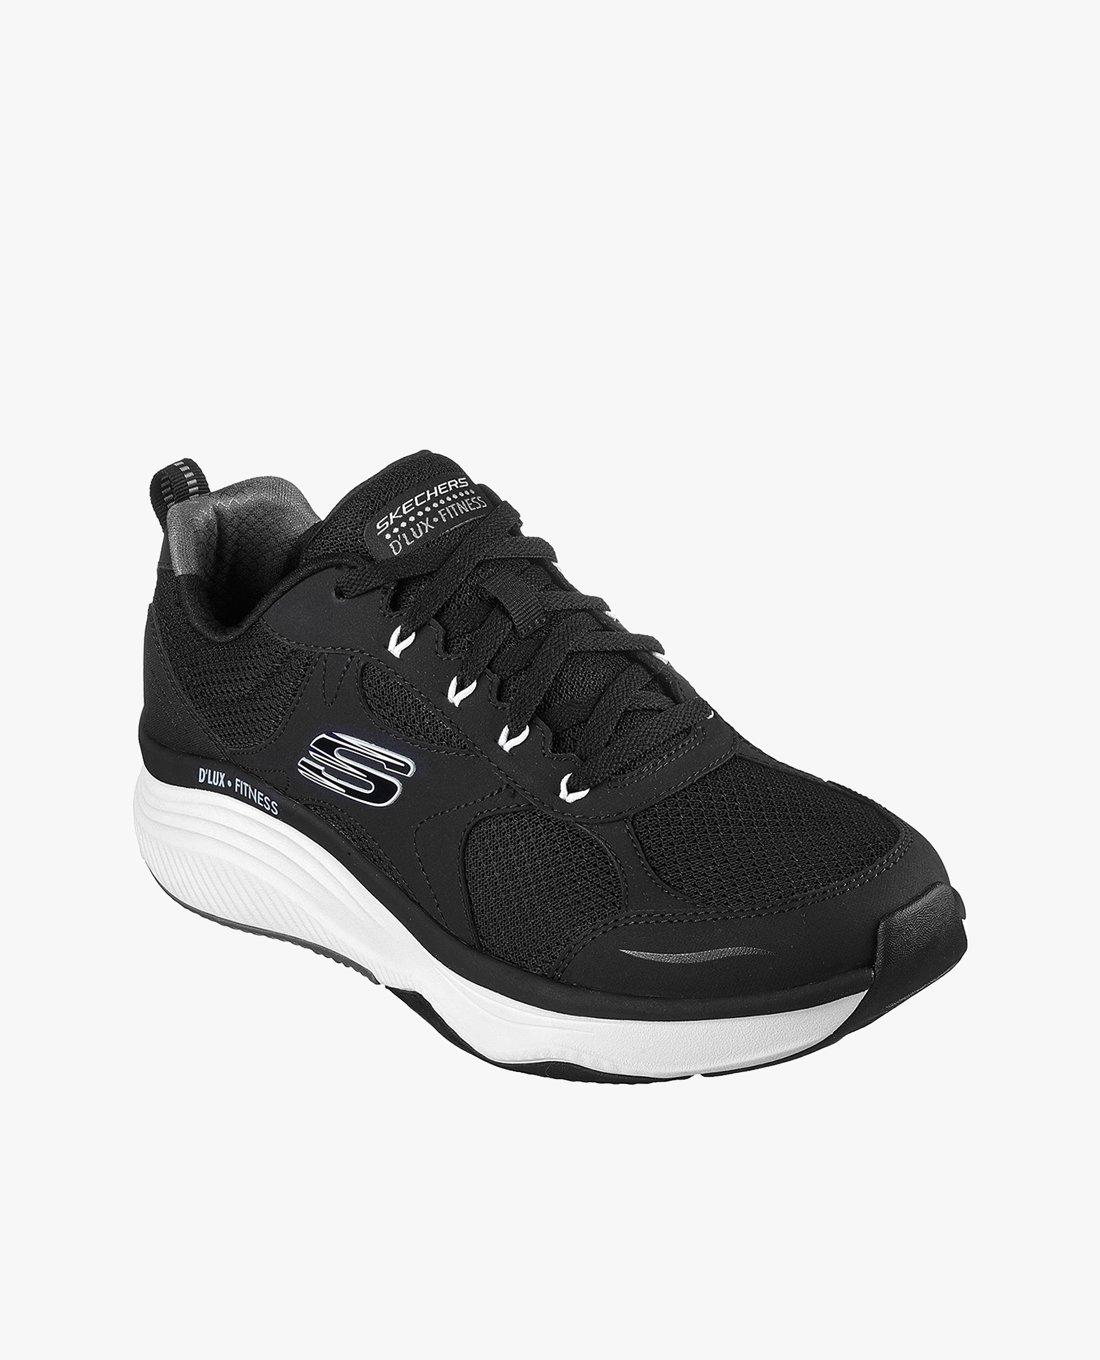 SKECHERS - Giày thể thao nam thắt dây DLux Fitness 232359